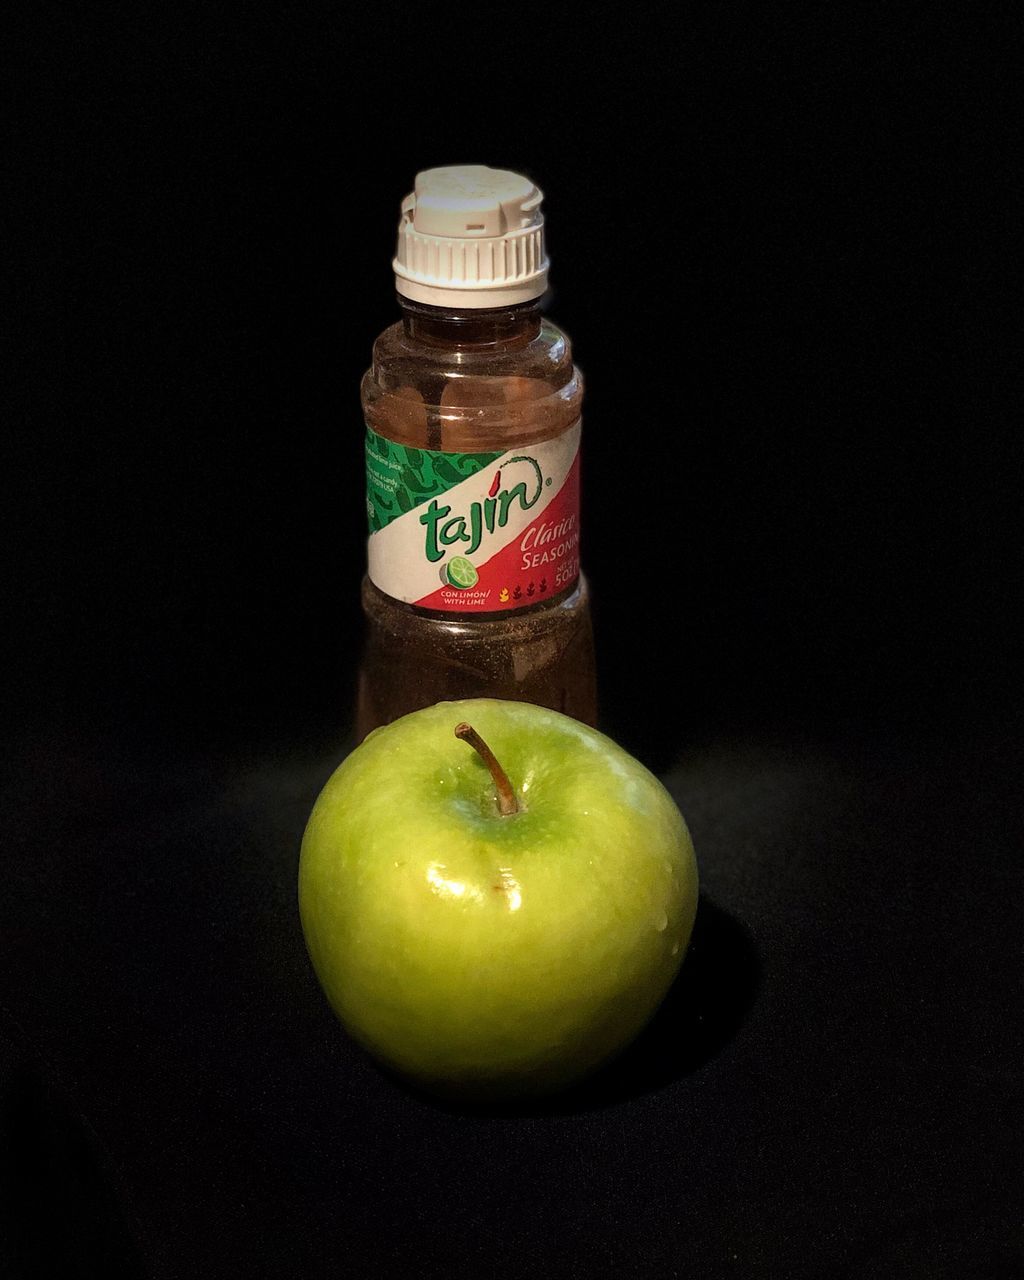 black background, healthy eating, indoors, food and drink, food, fruit, studio shot, wellbeing, apple - fruit, green color, still life, freshness, close-up, no people, container, communication, text, cut out, copy space, apple